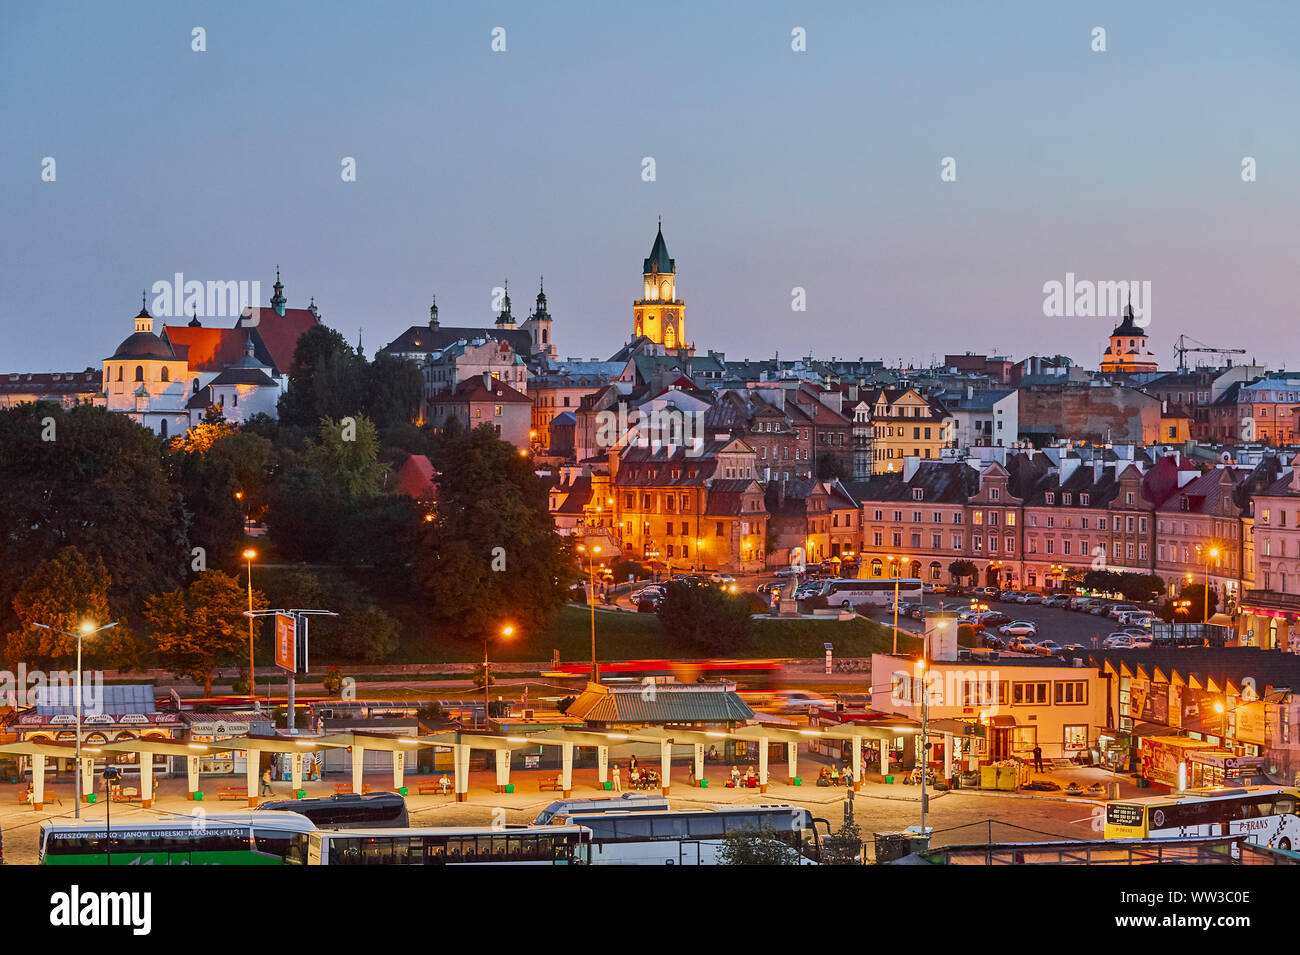 The Old Town of Lublin illuminated by lamp lights Stock Photo